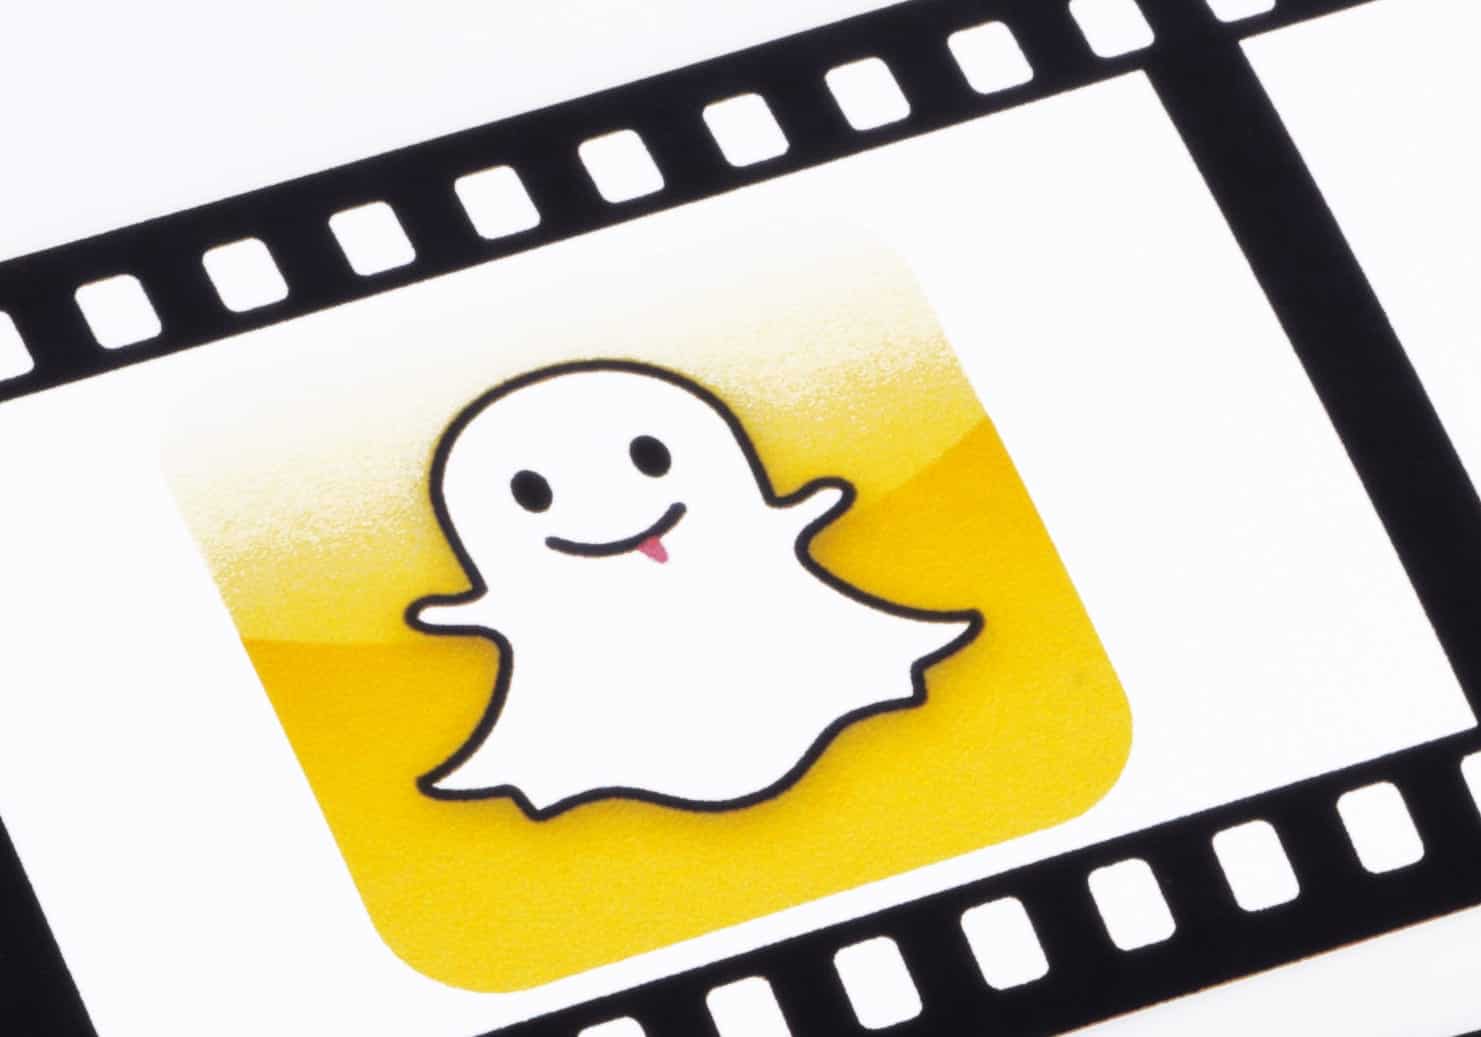 5 Reasons You Should Use Snapchat in Your Small Business